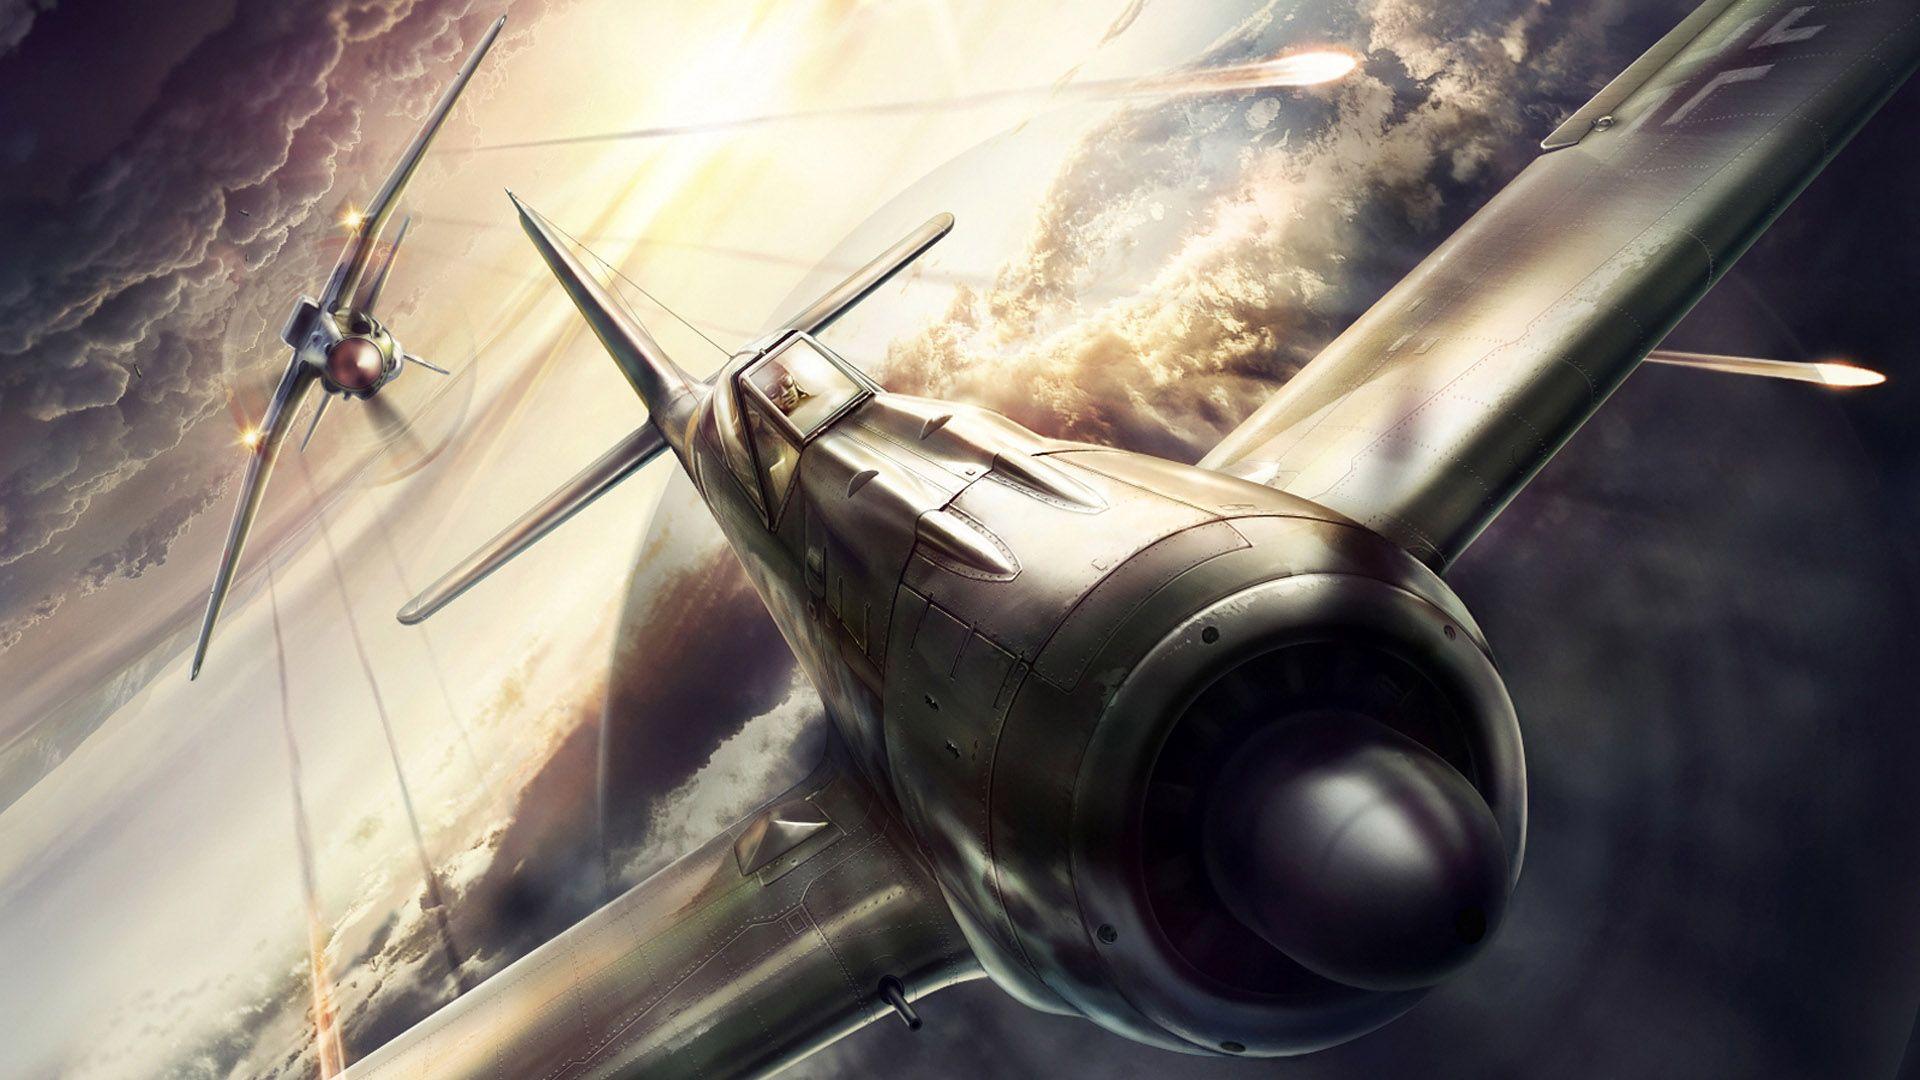 Dogfight Wallpaper For Mac Airplanes In Mission 75709674.jpeg